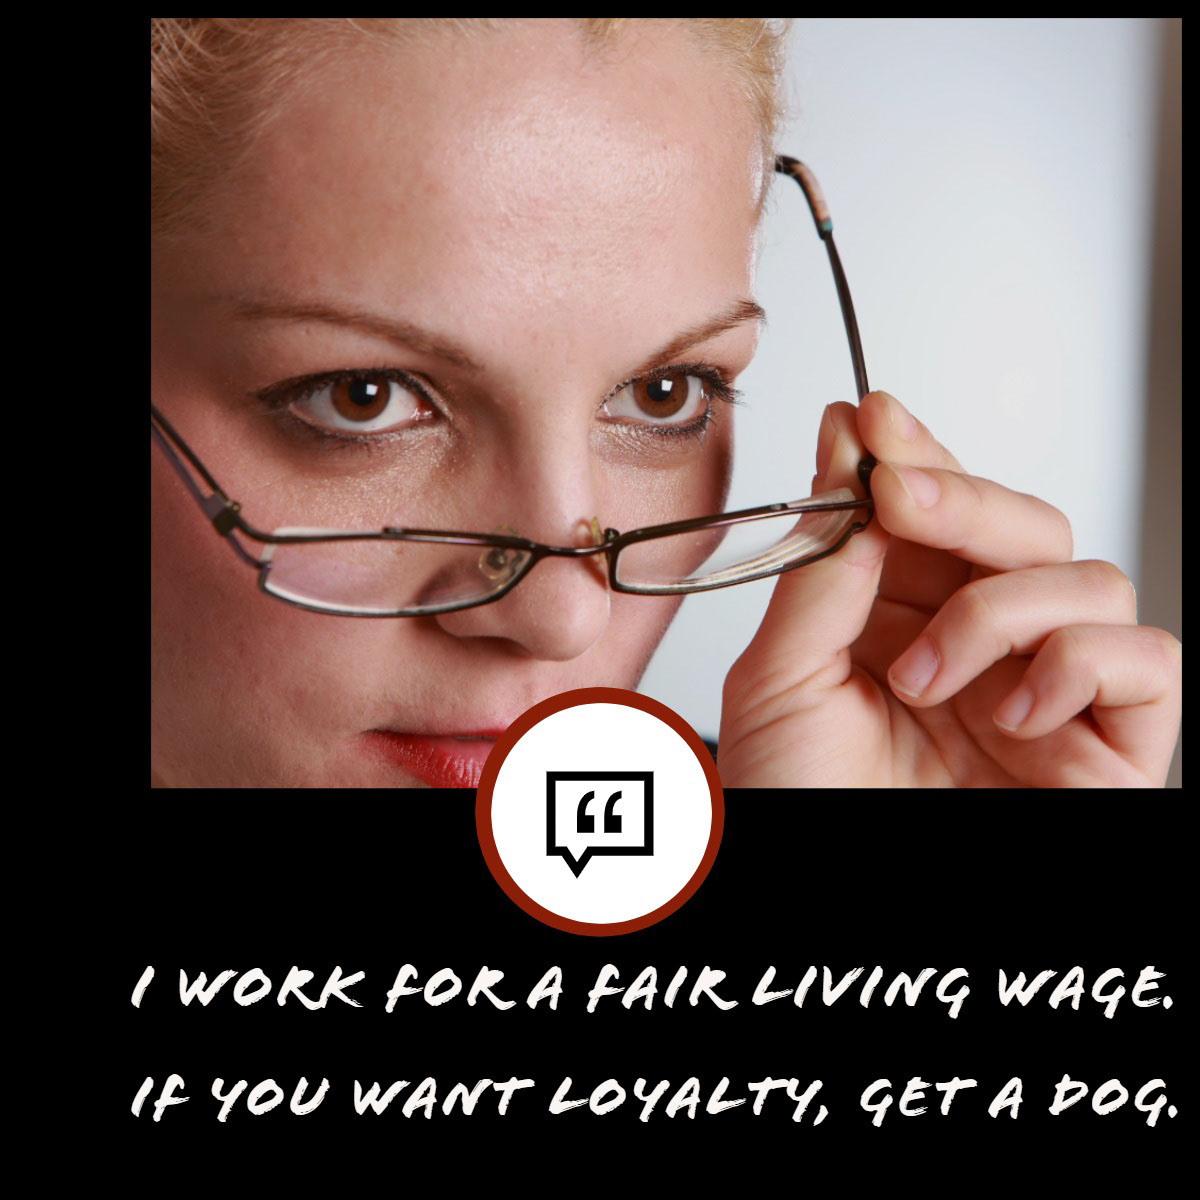 I work for a fair living wage. <BR>If you want loyalty,  get a dog. I work for a fair living wage. <BR>If you want loyalty,  get a dog.